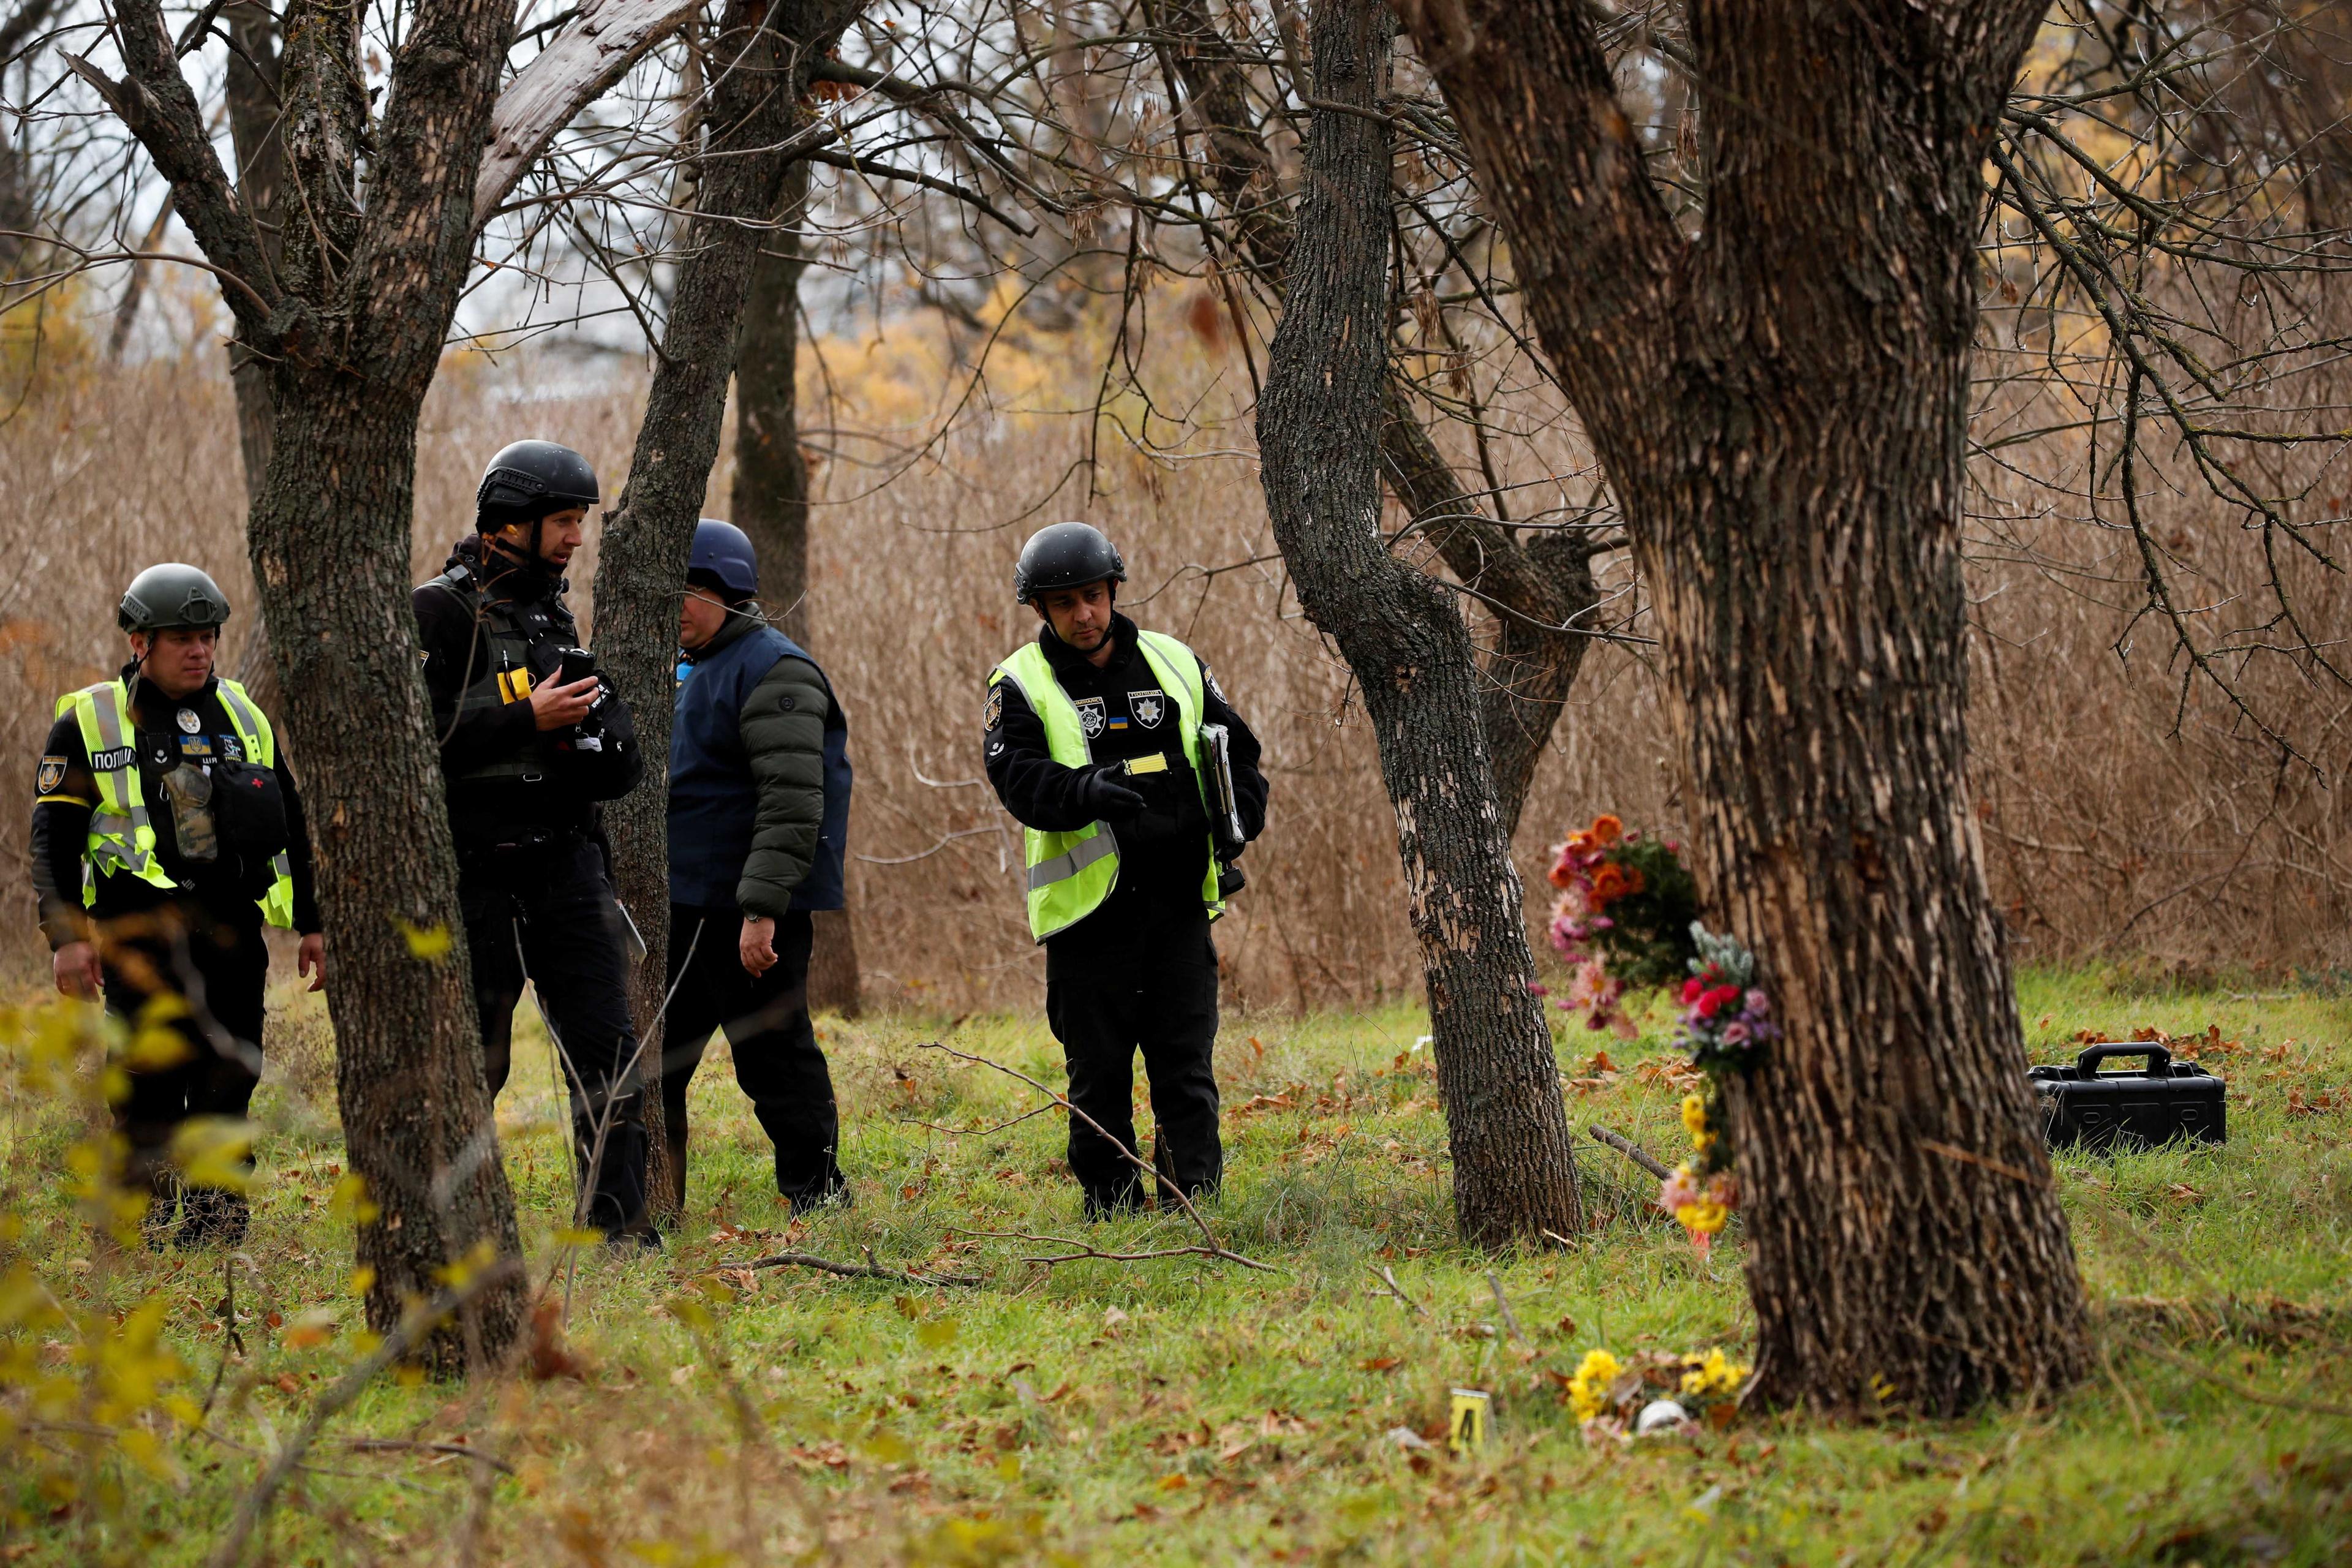 Ukrainian police forensic experts search for evidence at a park where fighting took place between Ukrainian territorial forces and Russian forces at the beginning of the war, in Kherson, Ukraine Nov 16. Photo: Reuters